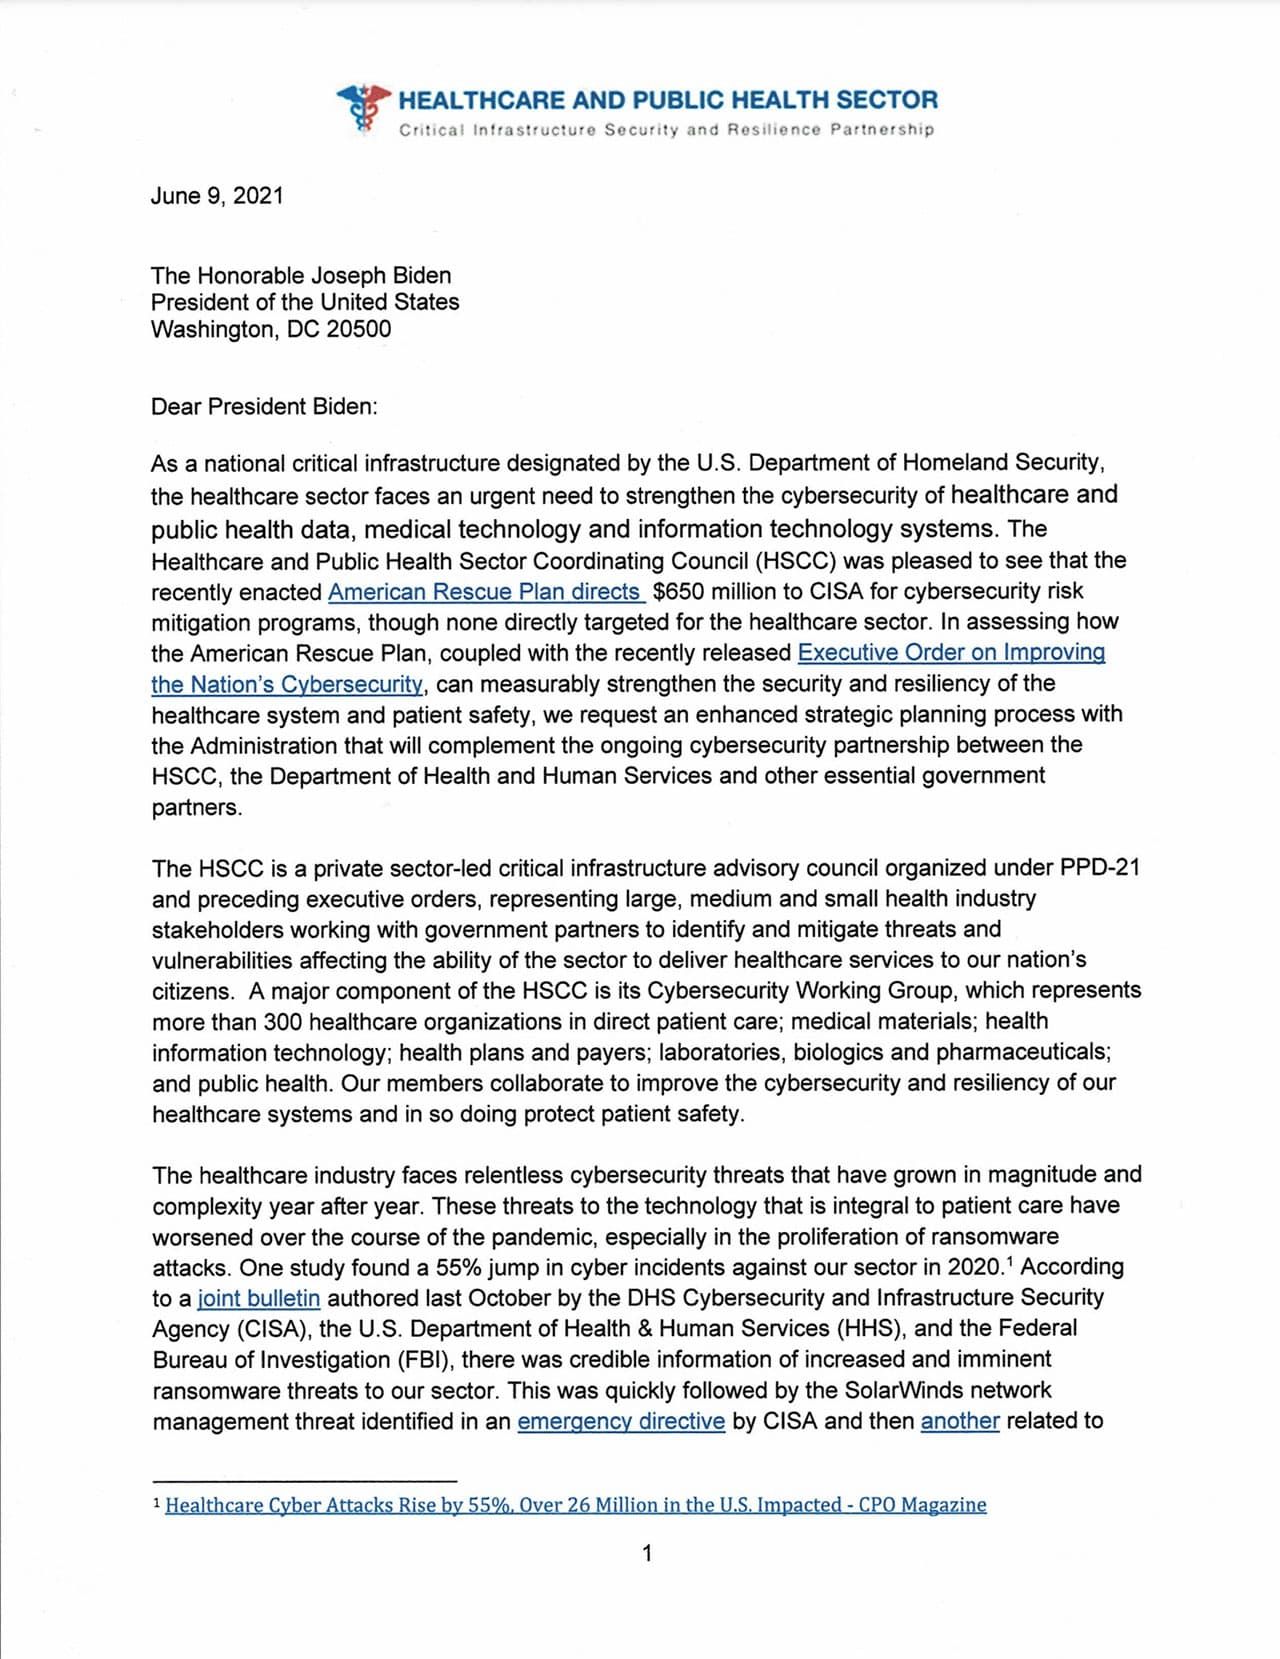 Health Sector Cybersecurity Letter To President Biden